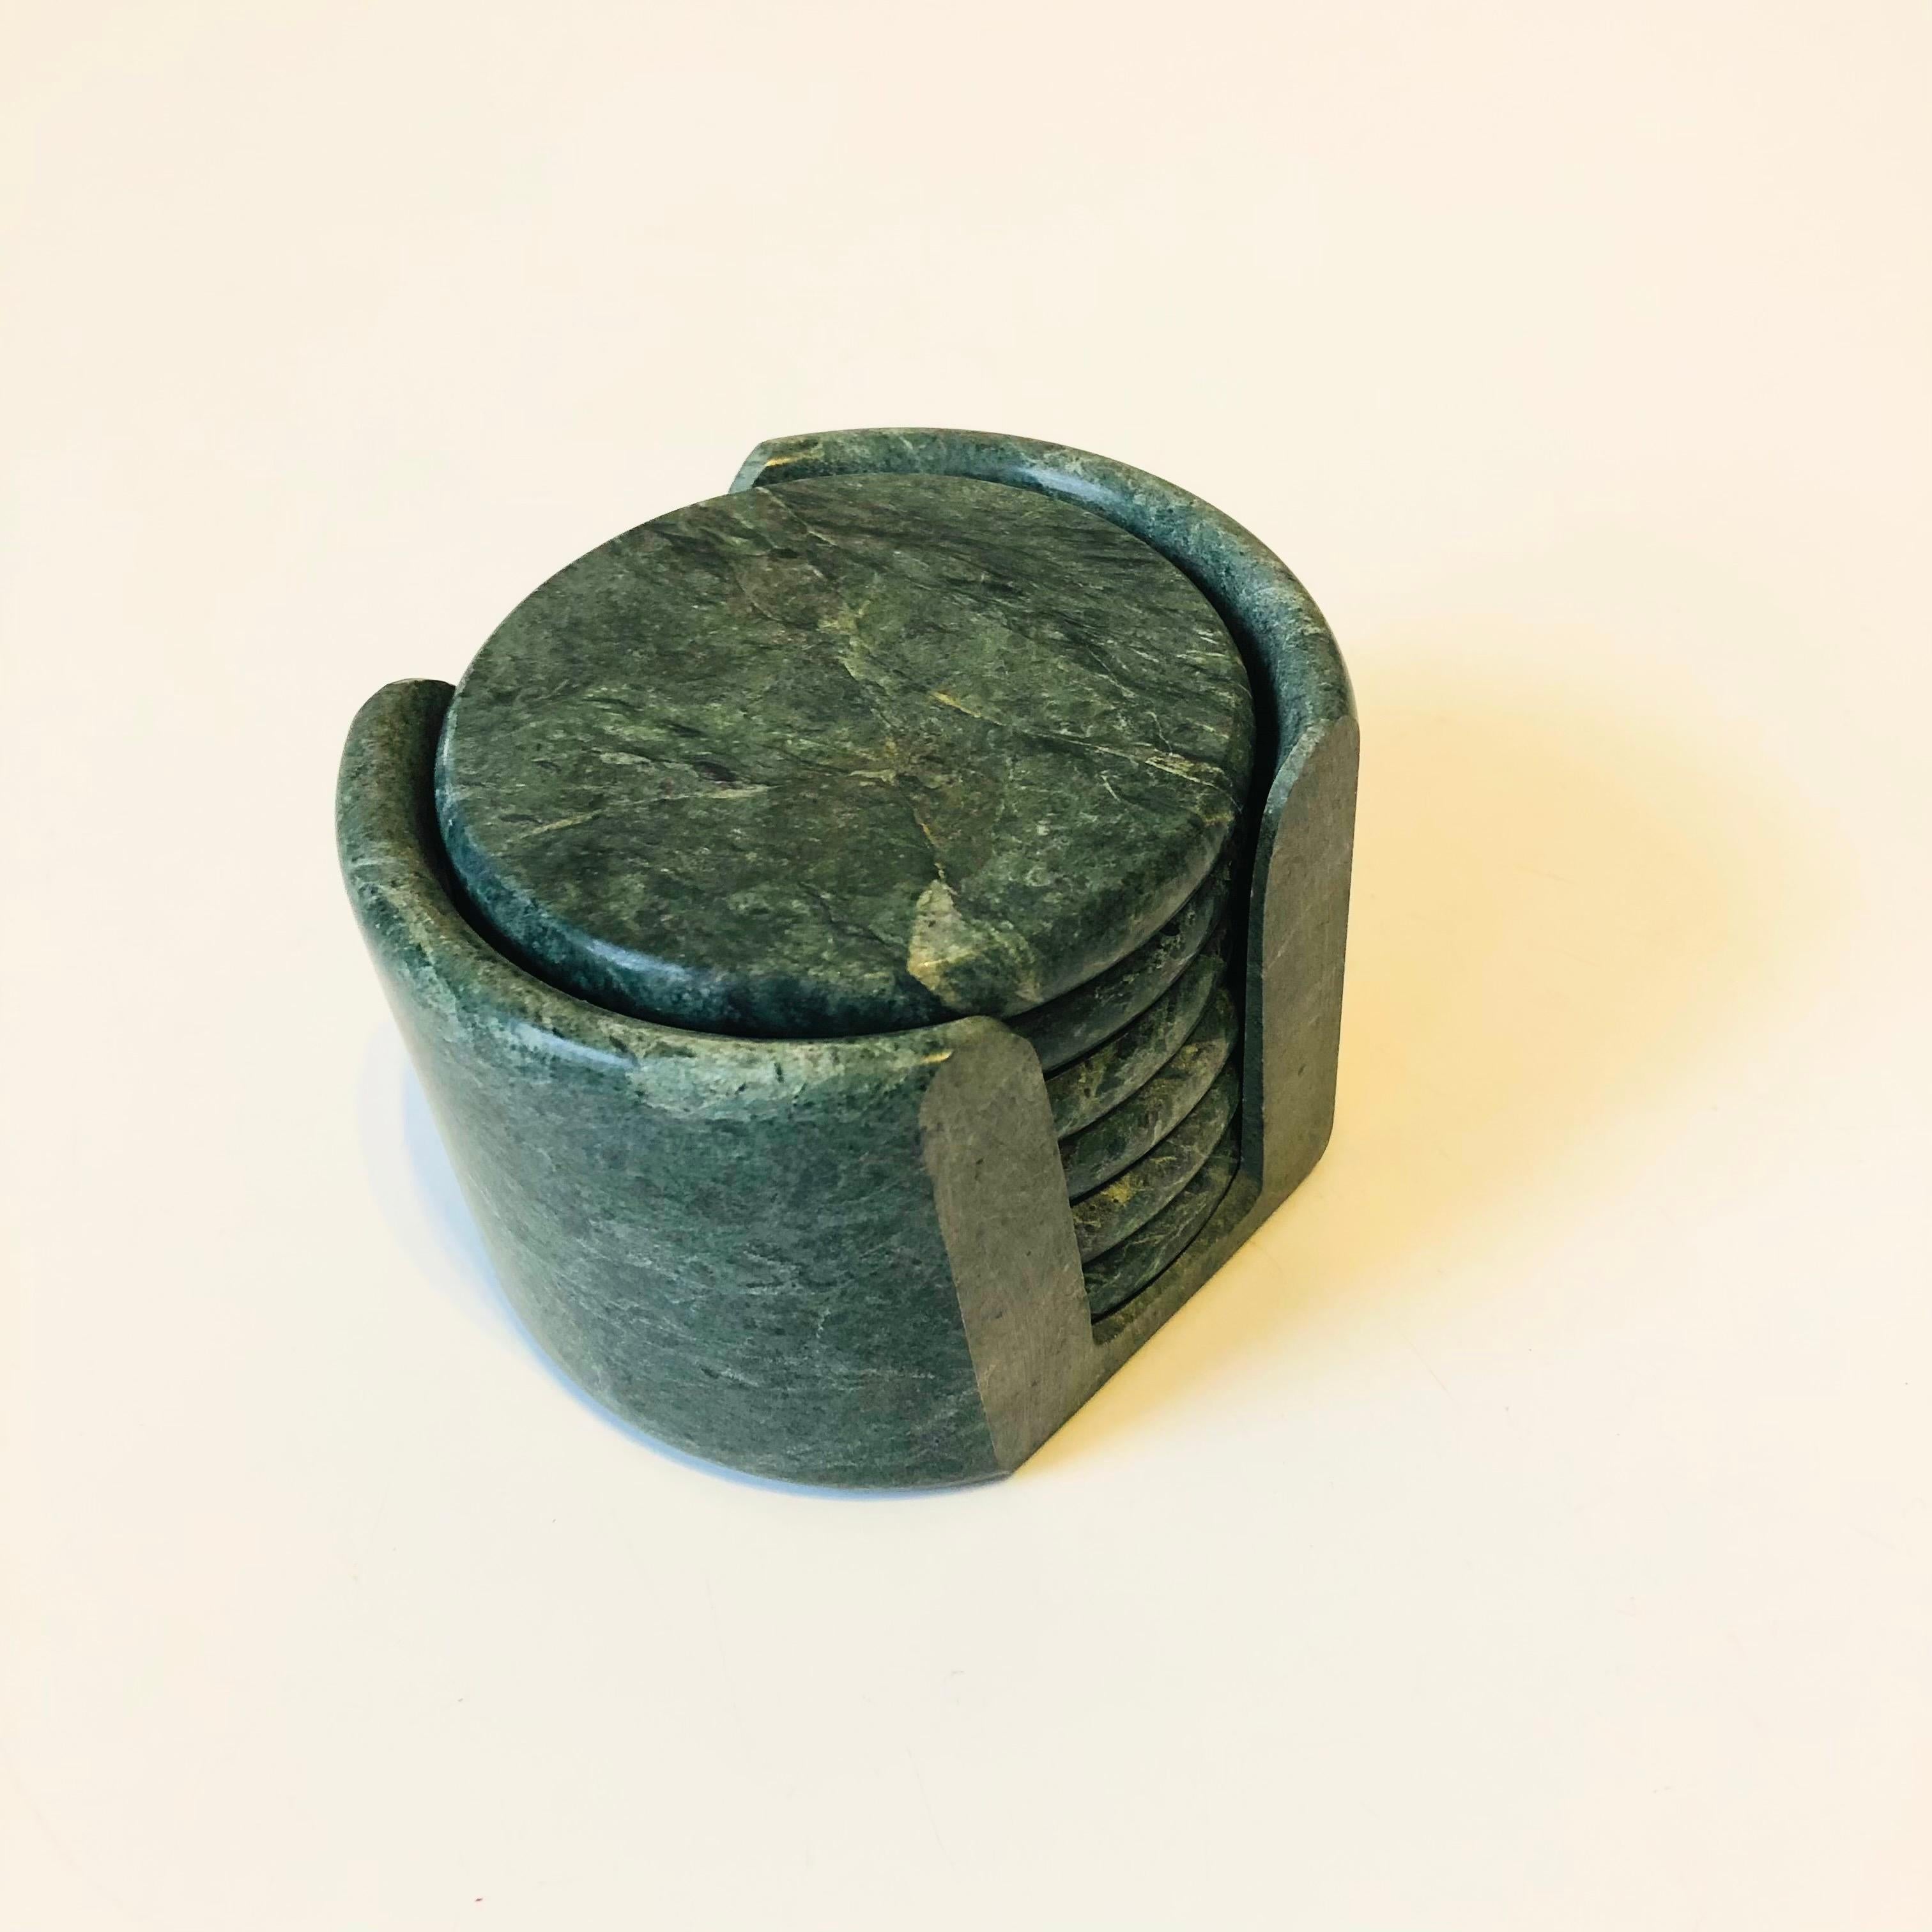 A set of 6 vintage green stone coasters in a matching holder. Each is made of a lovely circular slab of stone with beautiful natural veining. Cork backings to the coasters.

